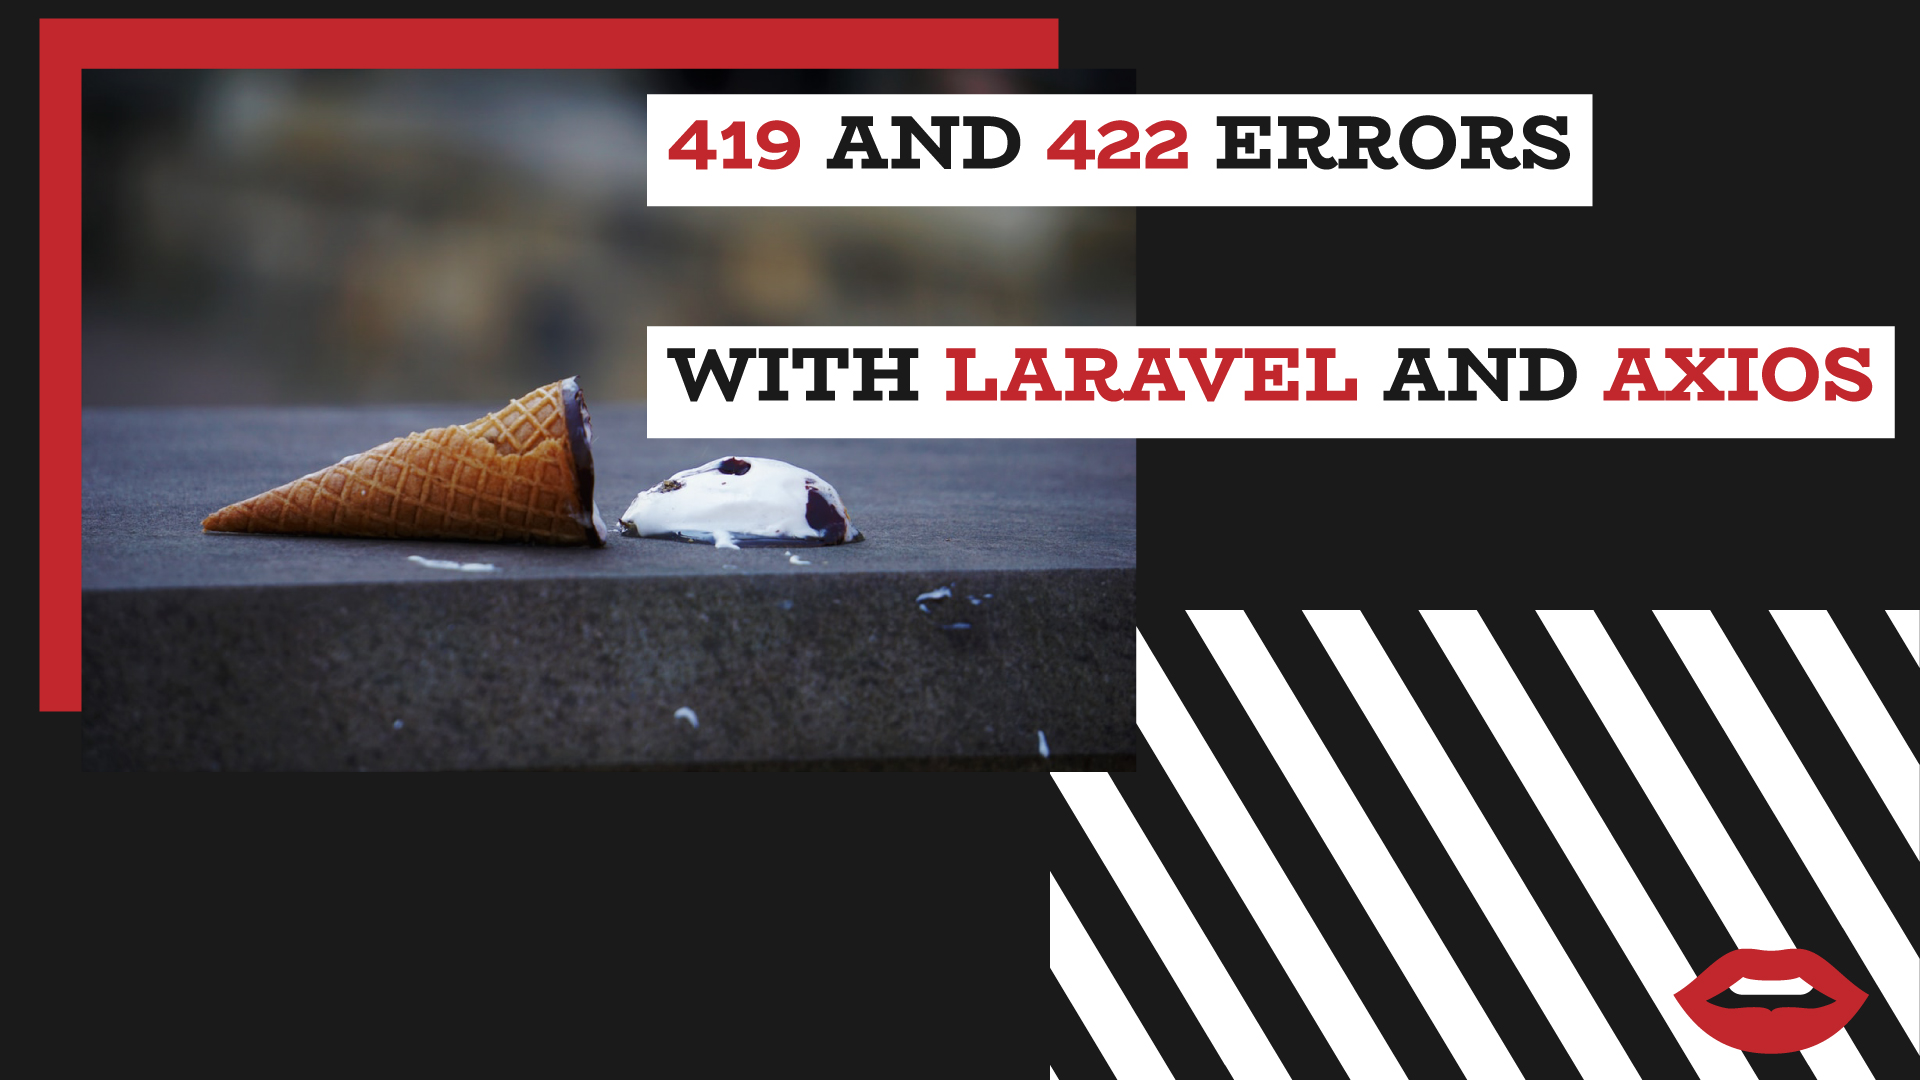 Ajax requests with Laravel and Axios - 422 and 419 errors article thumbnail